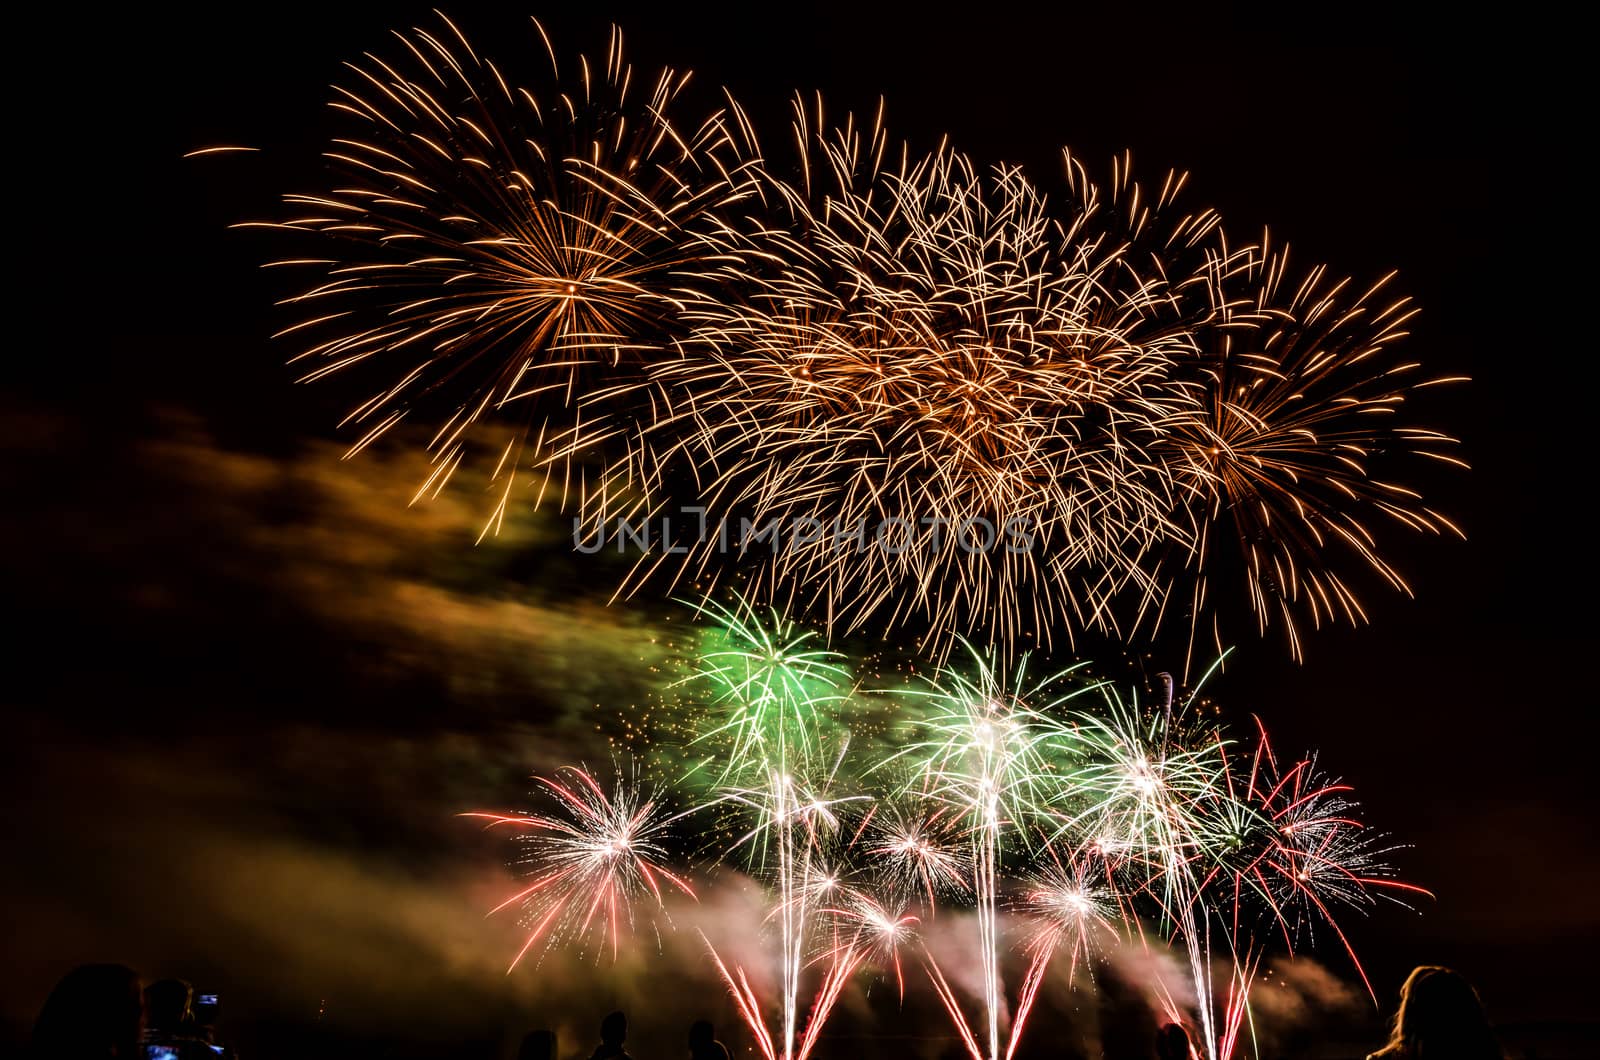 Colorful fireworks of various colors over night sky with spectators